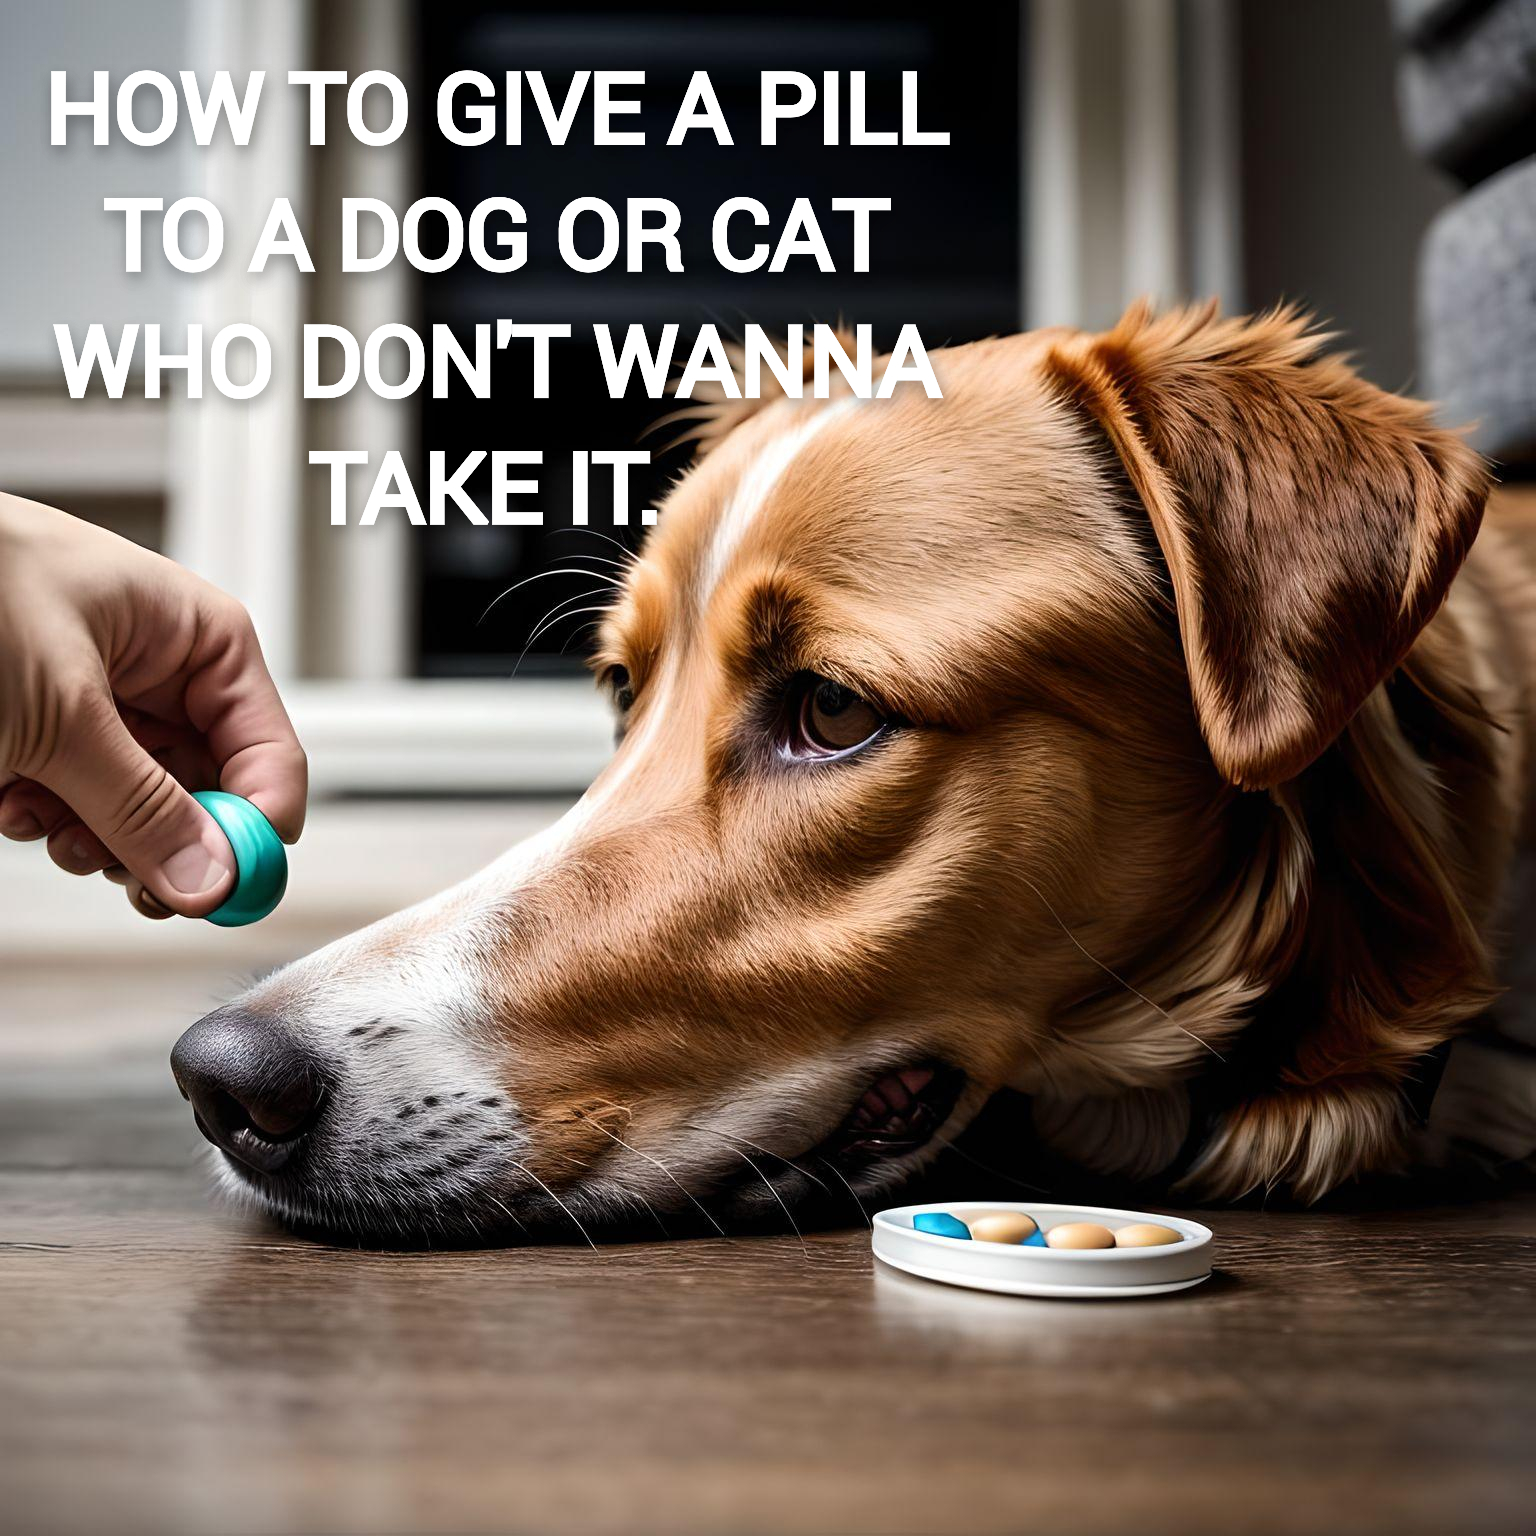 Pilling (Administering Pills) to the Impossible Dog or Cat